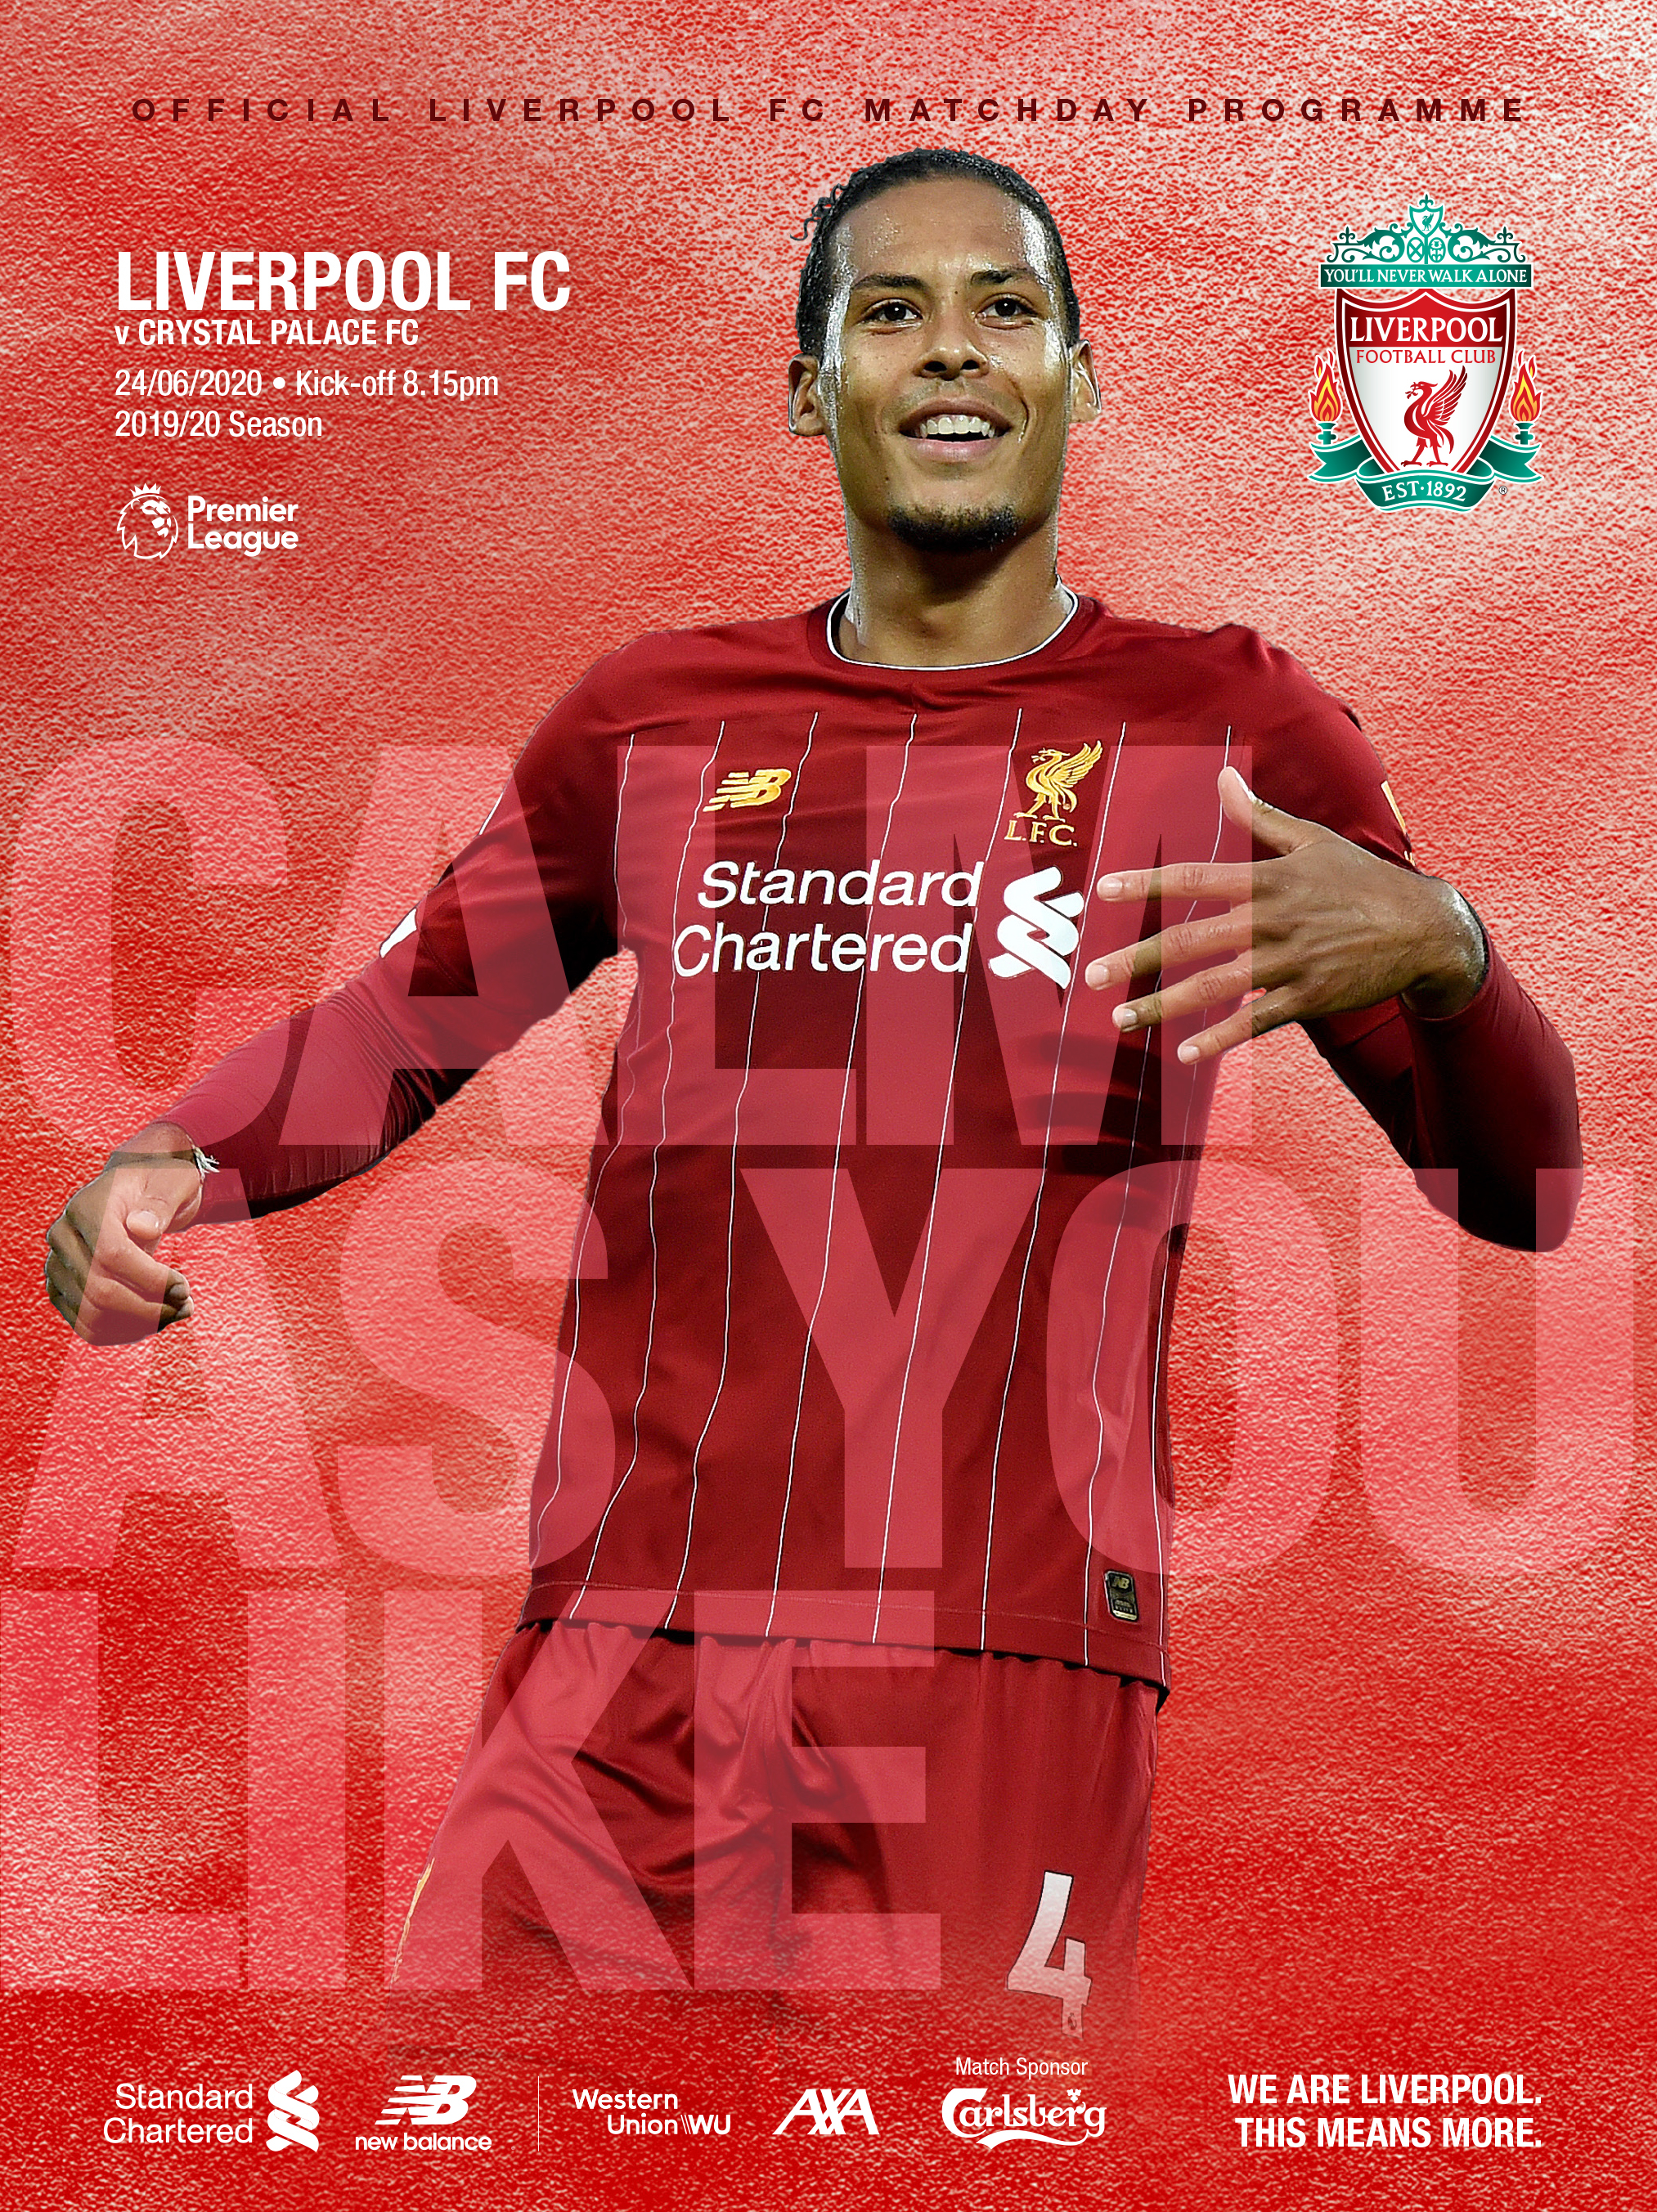 Pre-Order Now: Lfc Matchday Programme Set For Return - Liverpool Fc